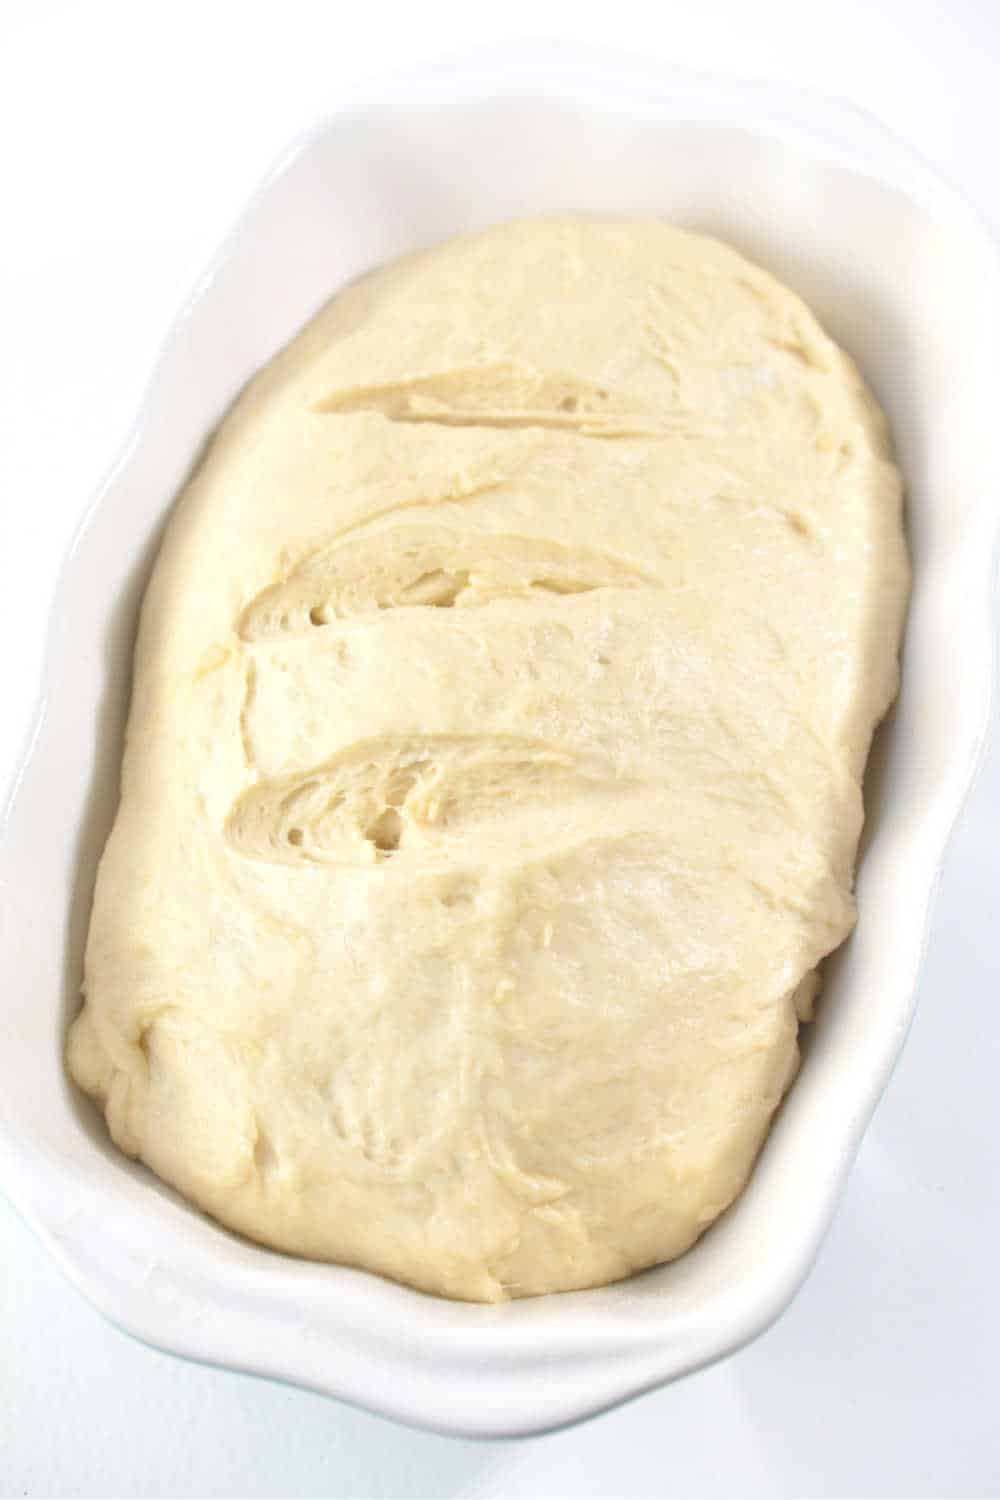 Bread dough in a loaf pan